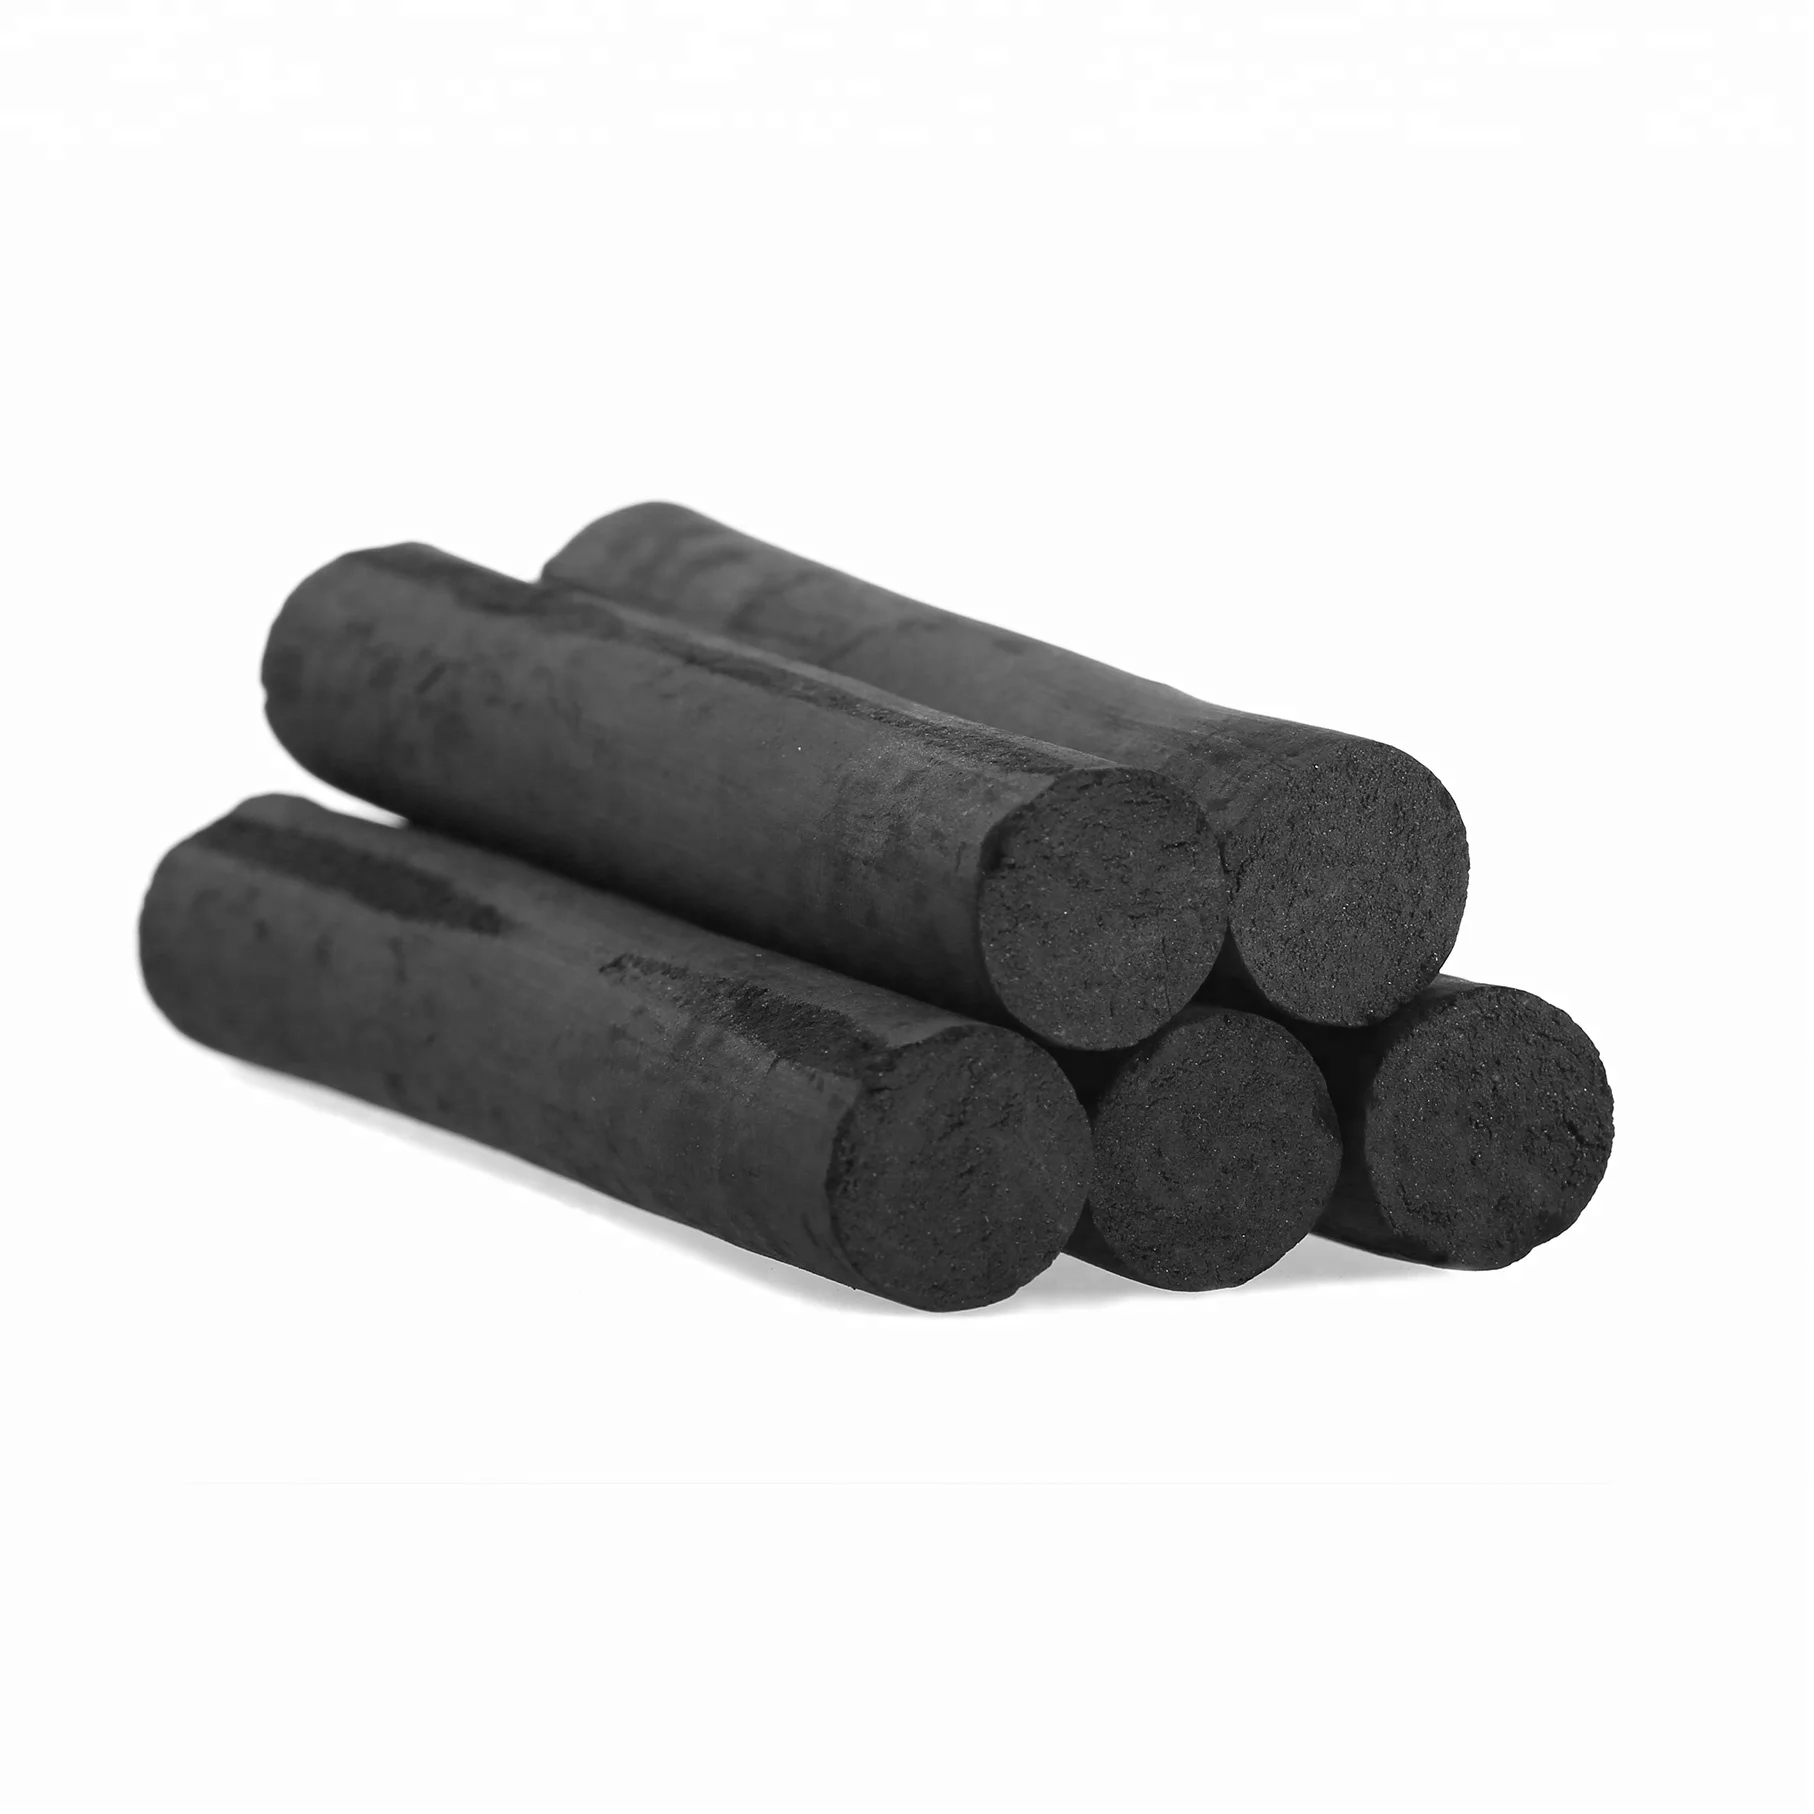 Hq Free Sample Bamboo/coconut Shell Finger Charcoal For Bbq And Shisha ...